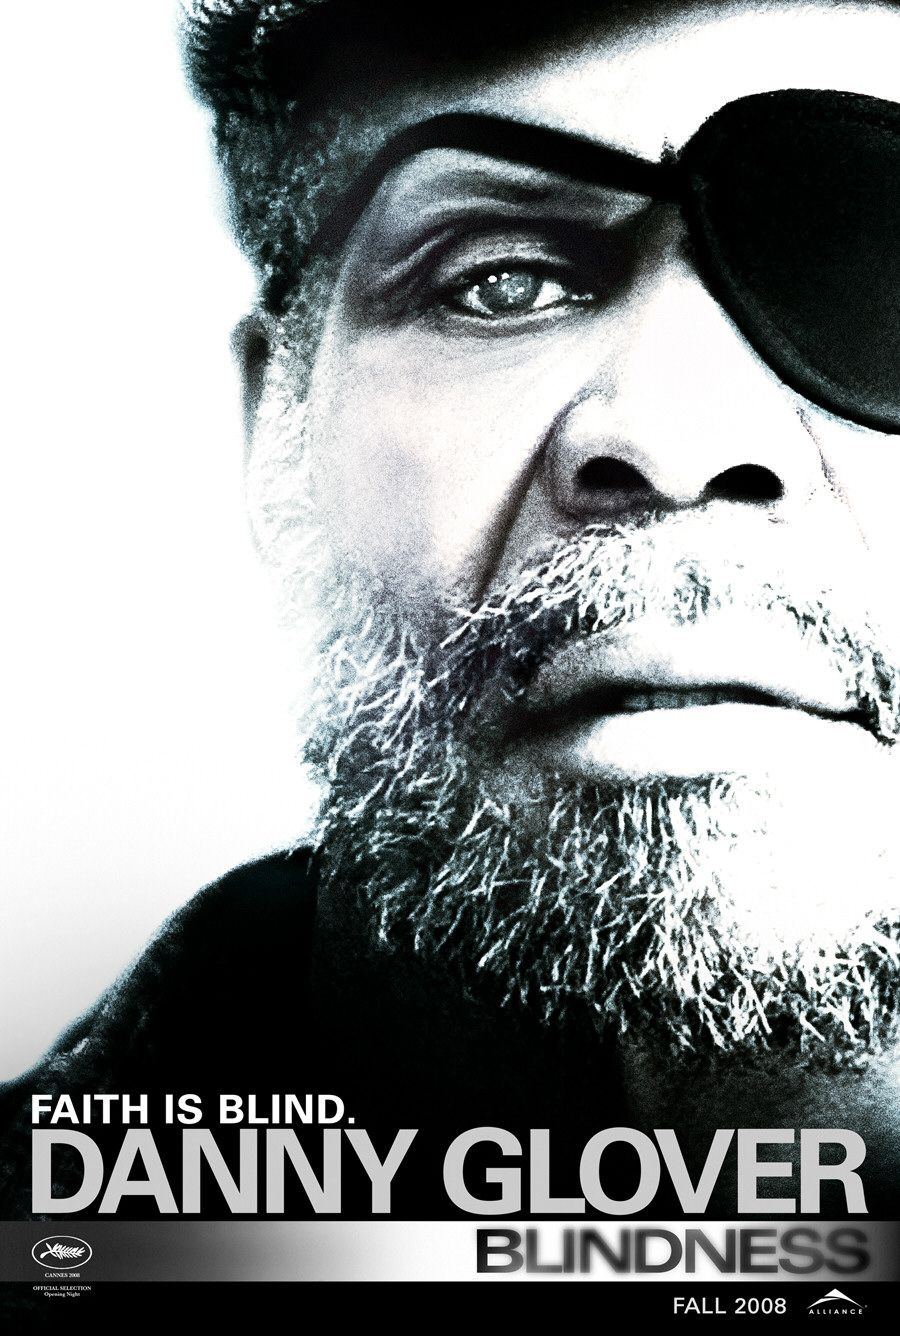 Extra Large Movie Poster Image for Blindness (#7 of 10)